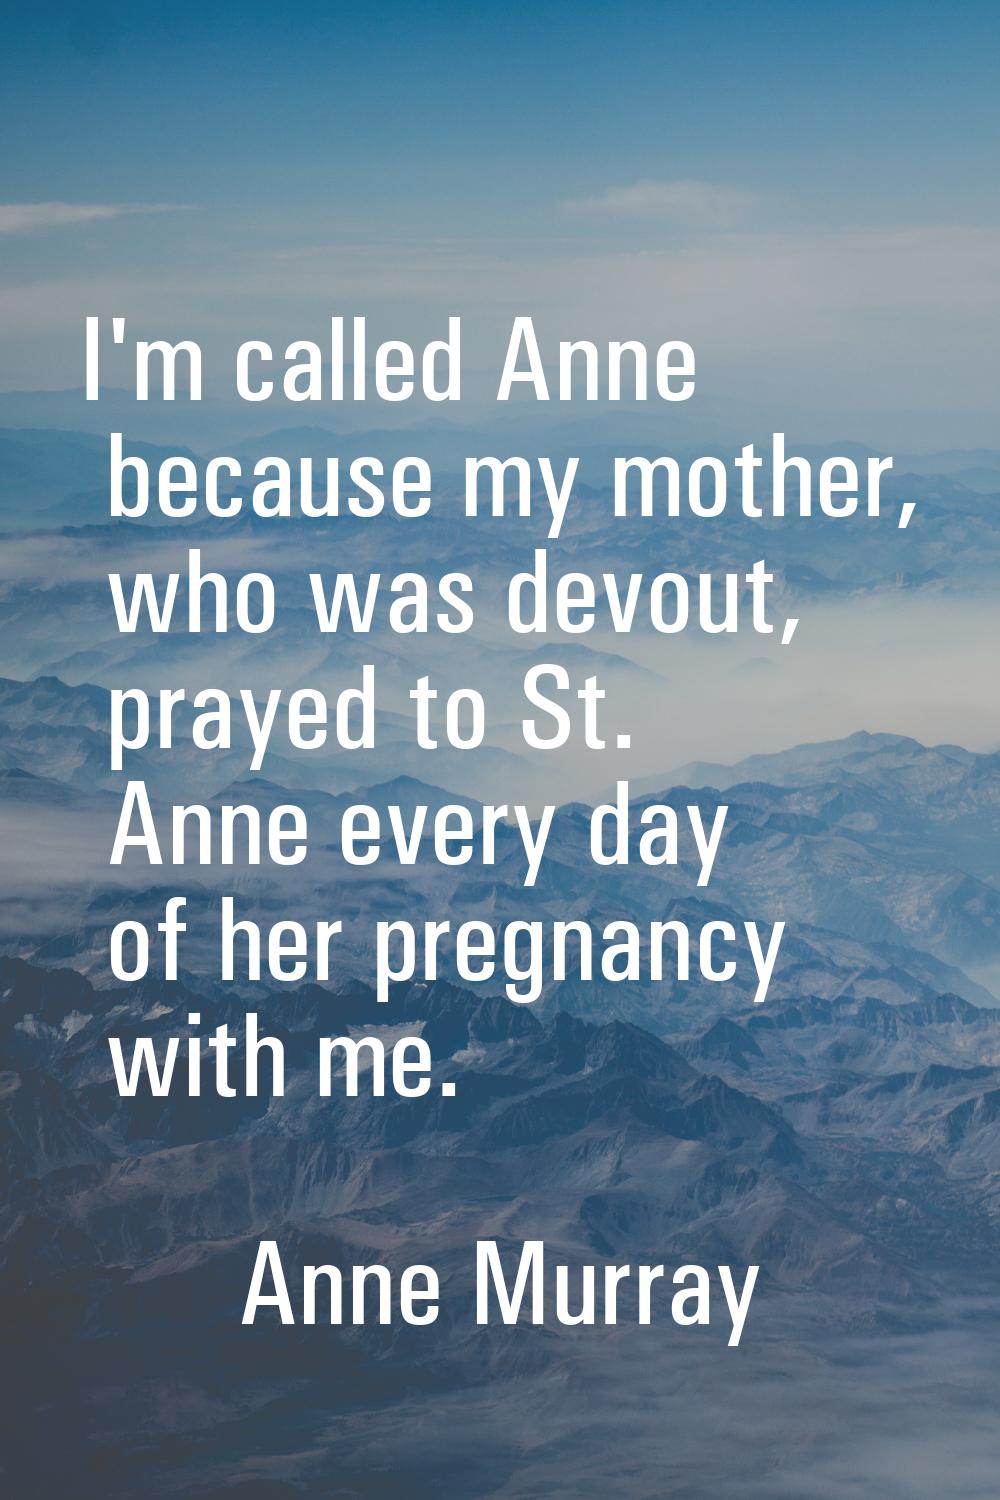 I'm called Anne because my mother, who was devout, prayed to St. Anne every day of her pregnancy wi